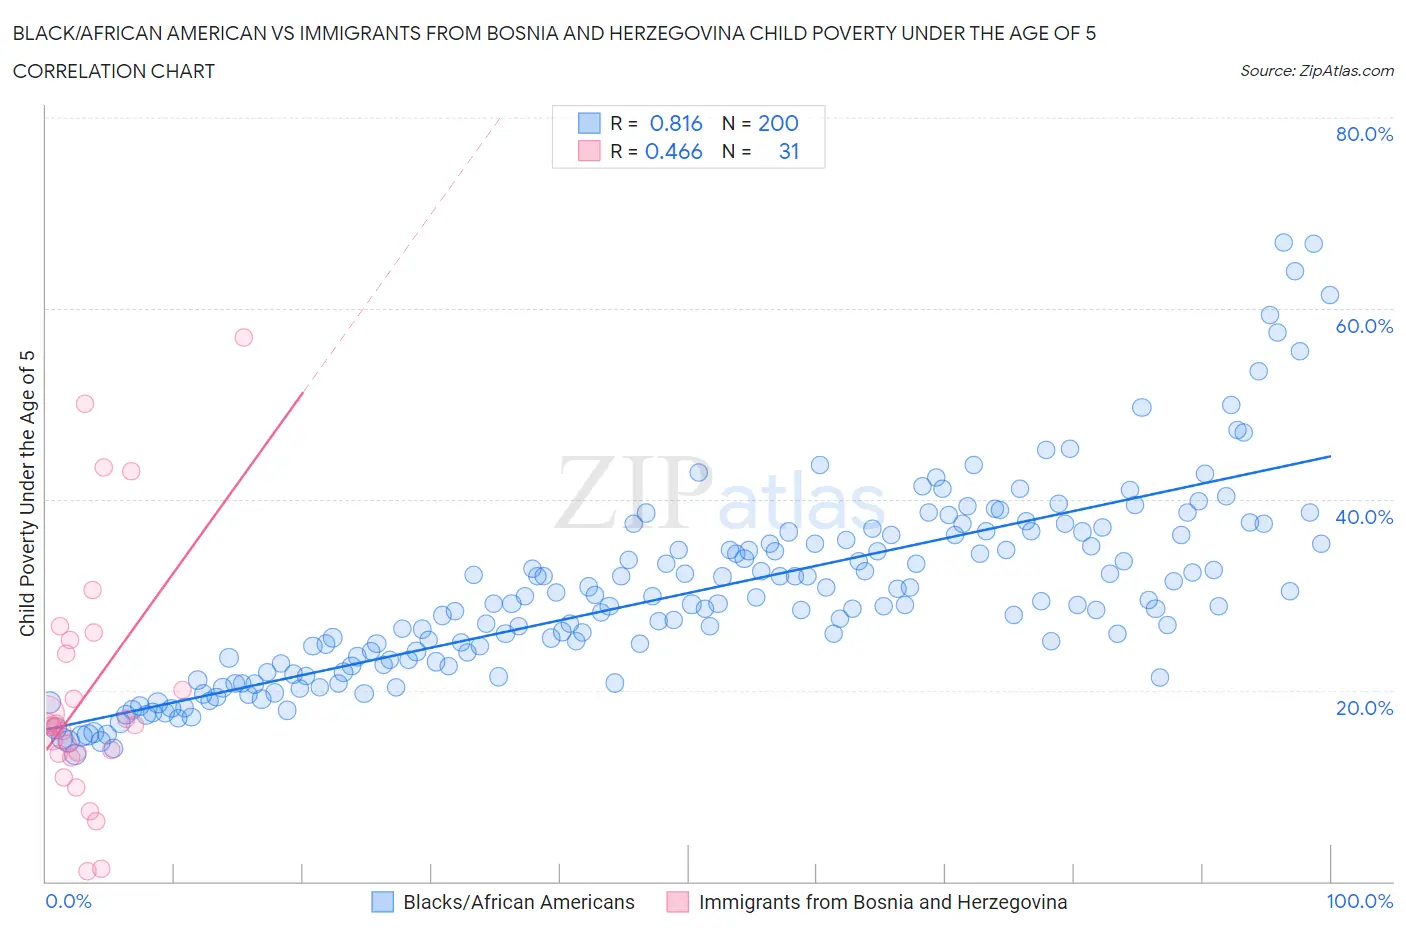 Black/African American vs Immigrants from Bosnia and Herzegovina Child Poverty Under the Age of 5